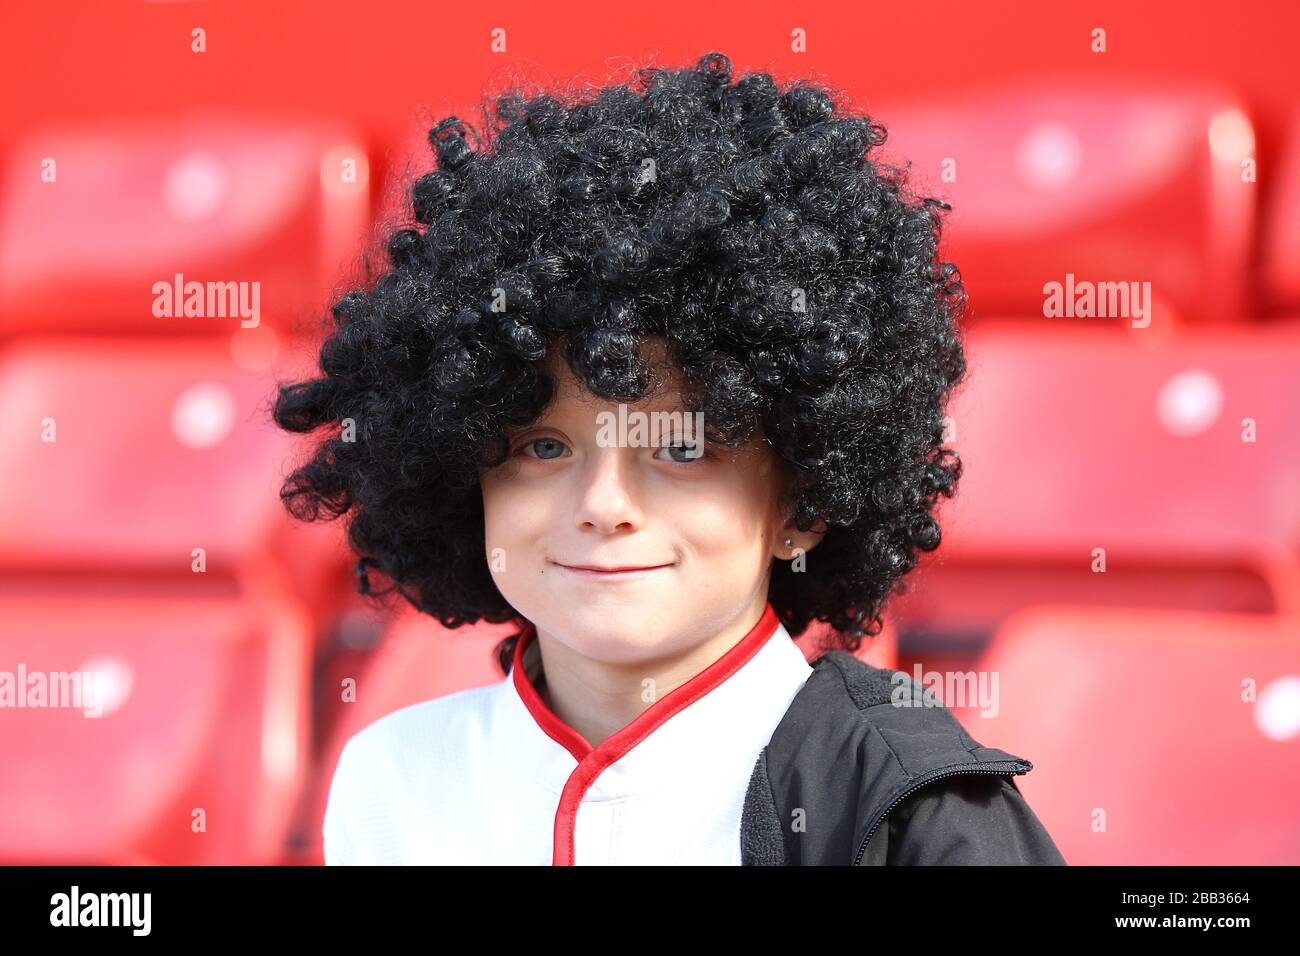 A young Manchester United fan wears a Marouane Fellaini wig in the stands at Old Trafford Stock Photo